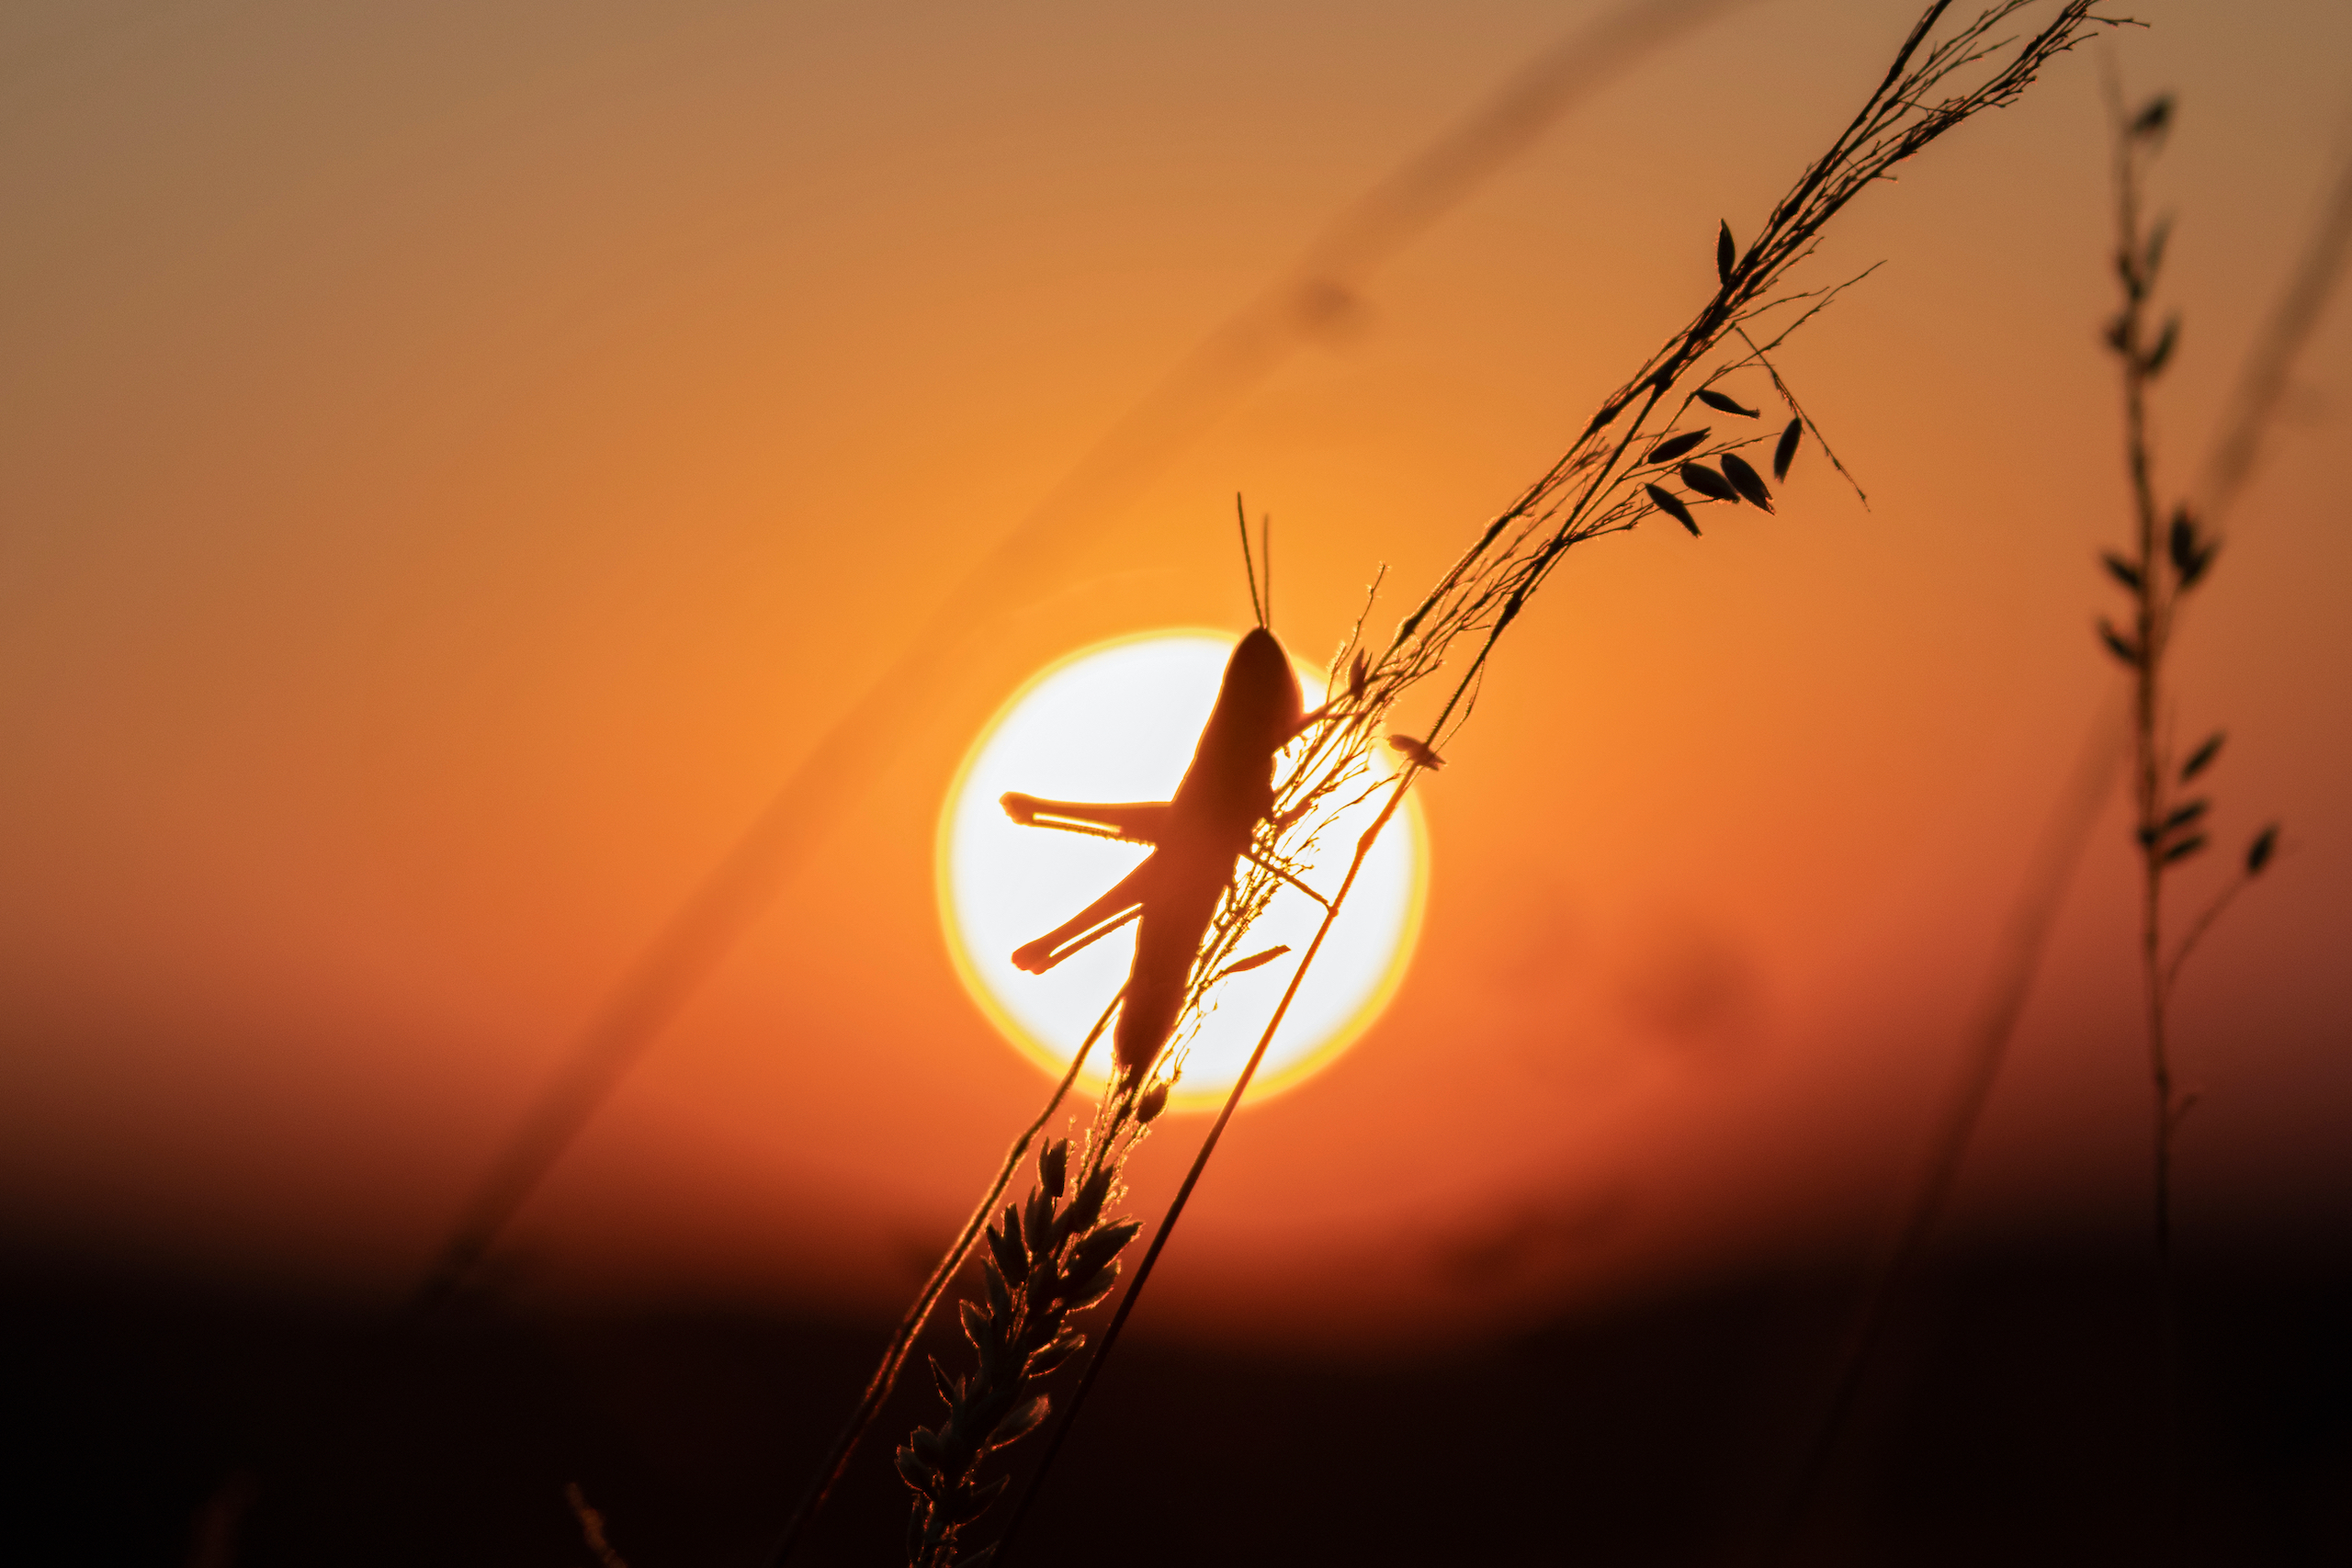 Silhouette of a grasshopper against an orange sunset background.